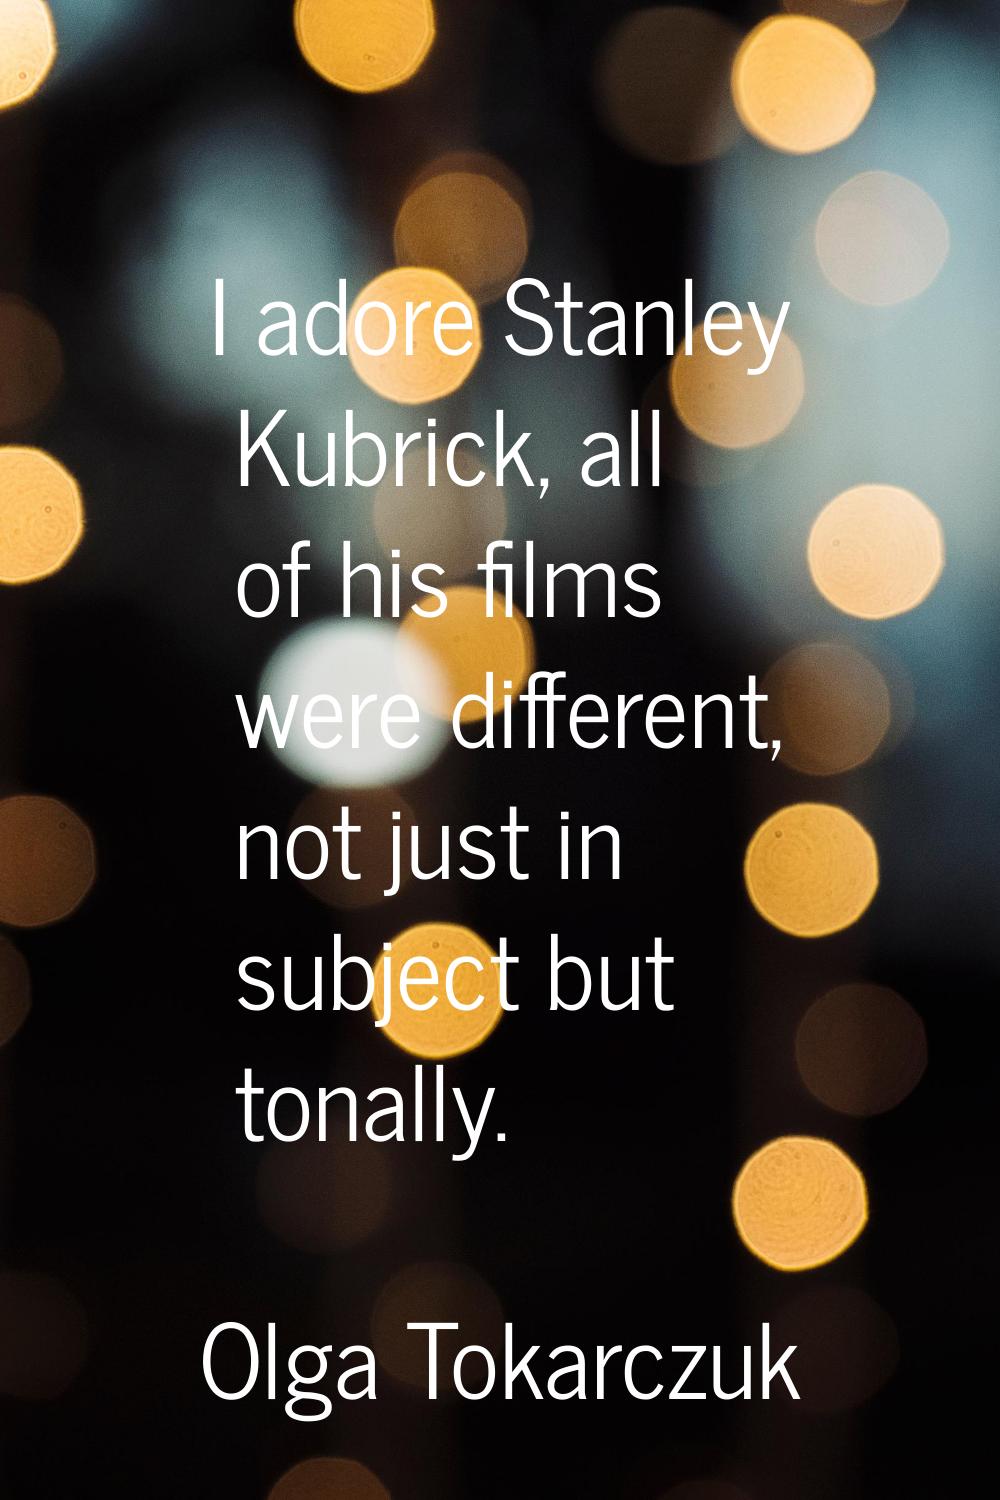 I adore Stanley Kubrick, all of his films were different, not just in subject but tonally.